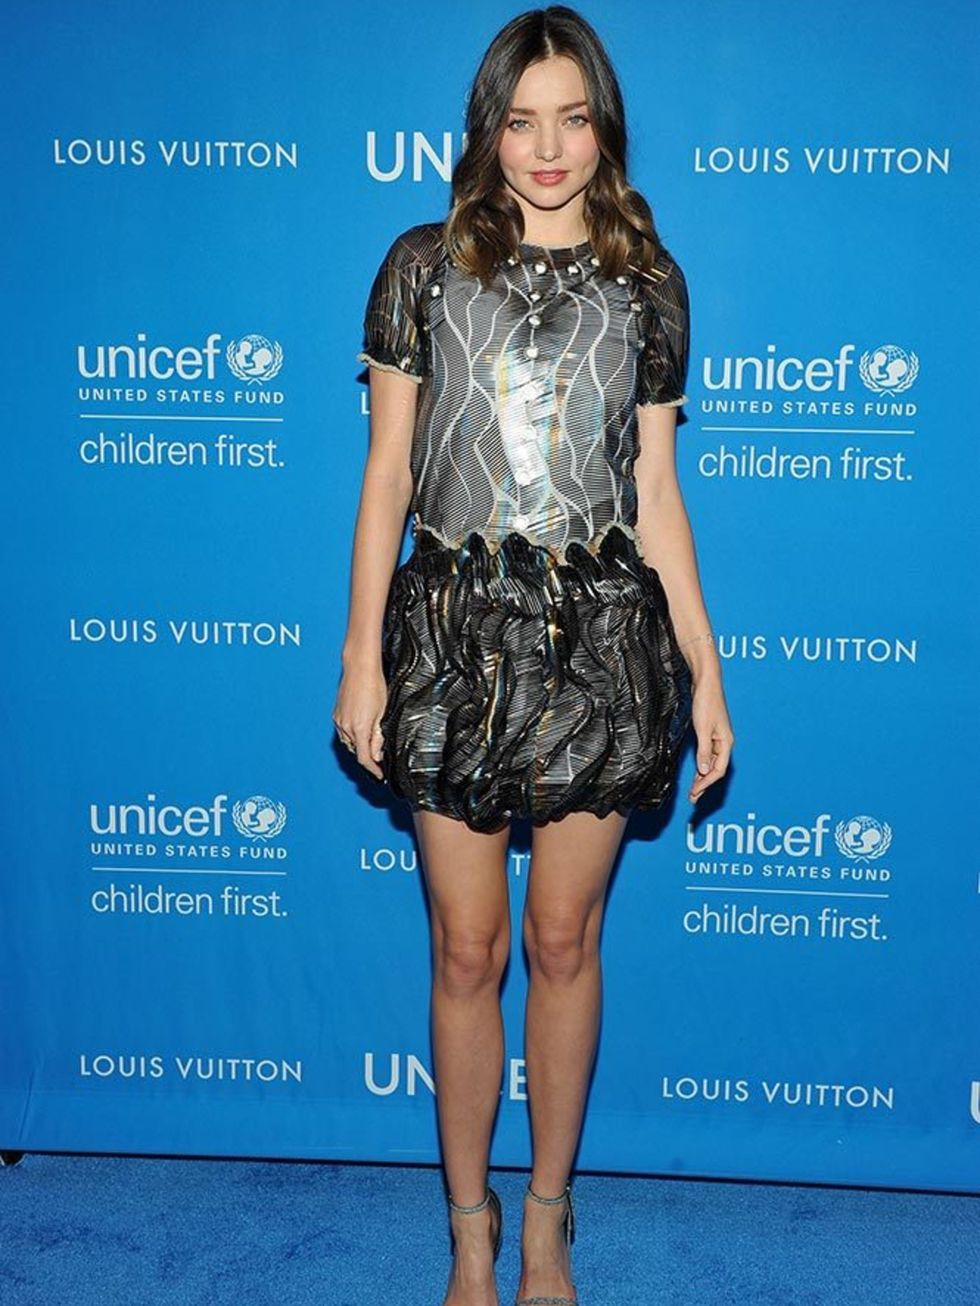 Louis Vuitton for UNICEF - Homepage